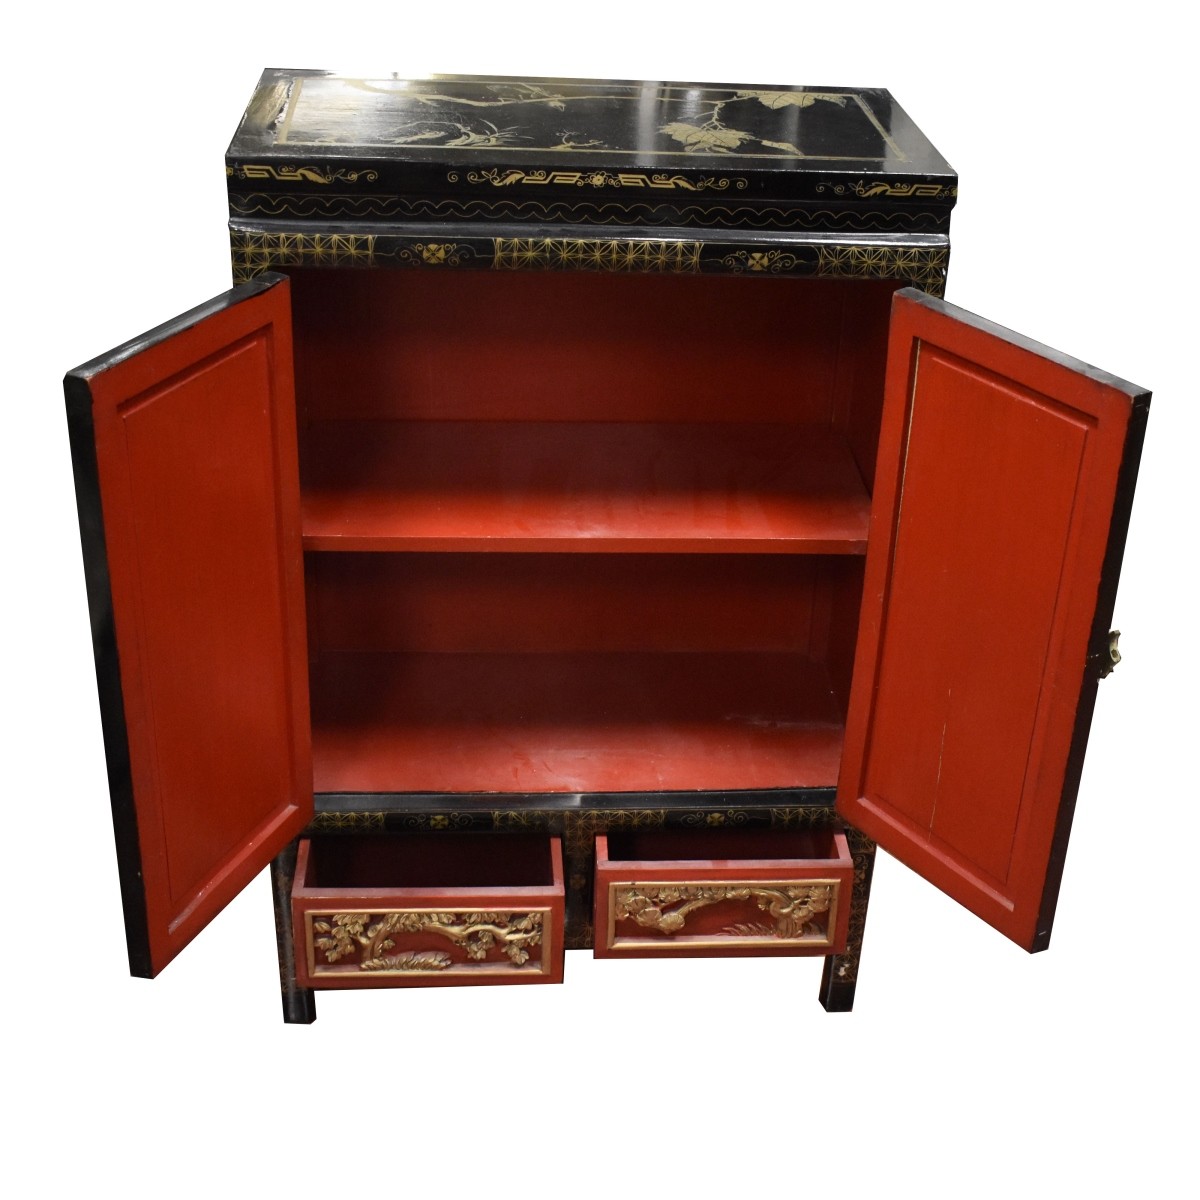 Chinese Lacquer Wood Cabinet